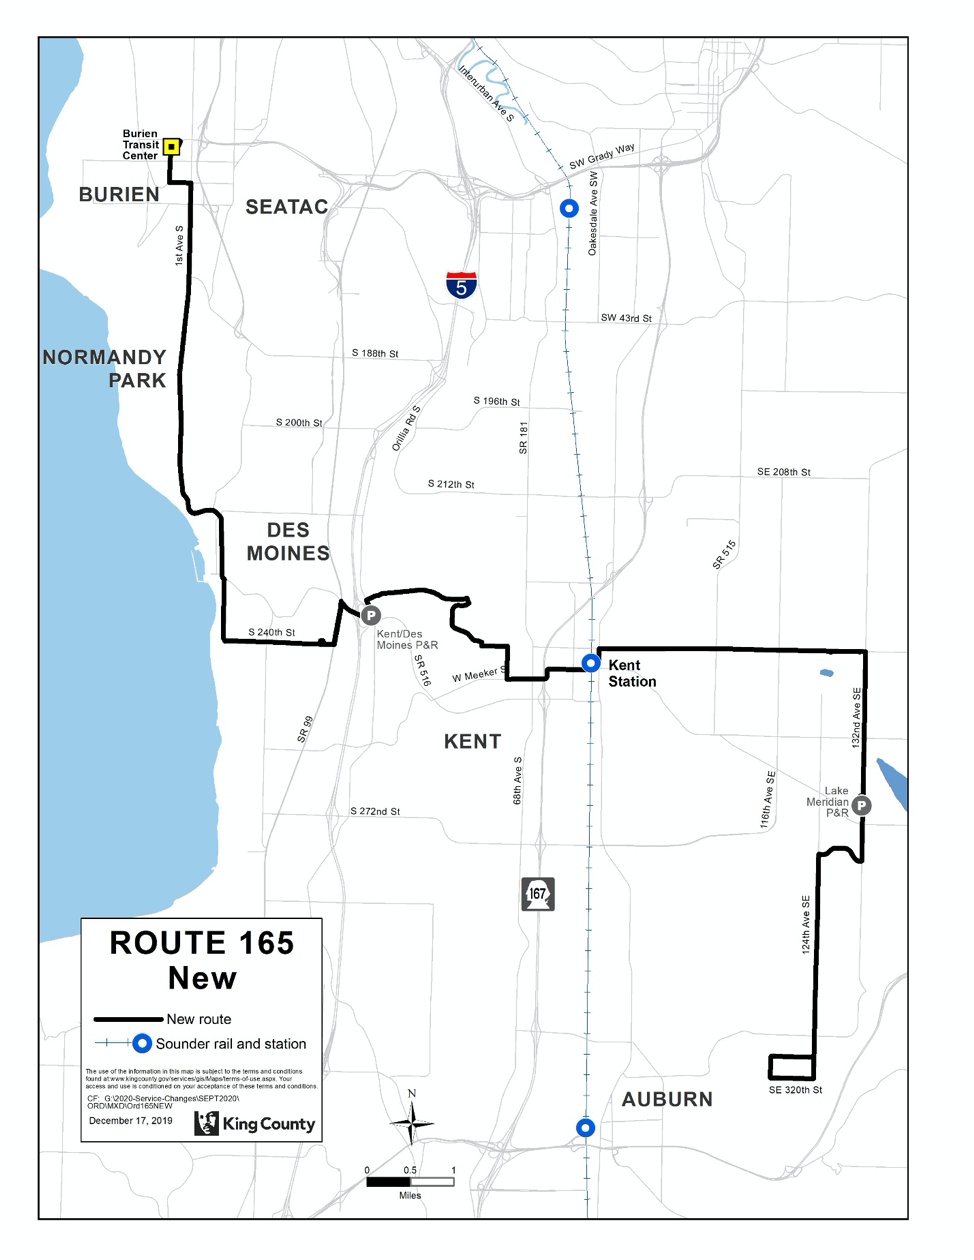 New Route 165. (King County)